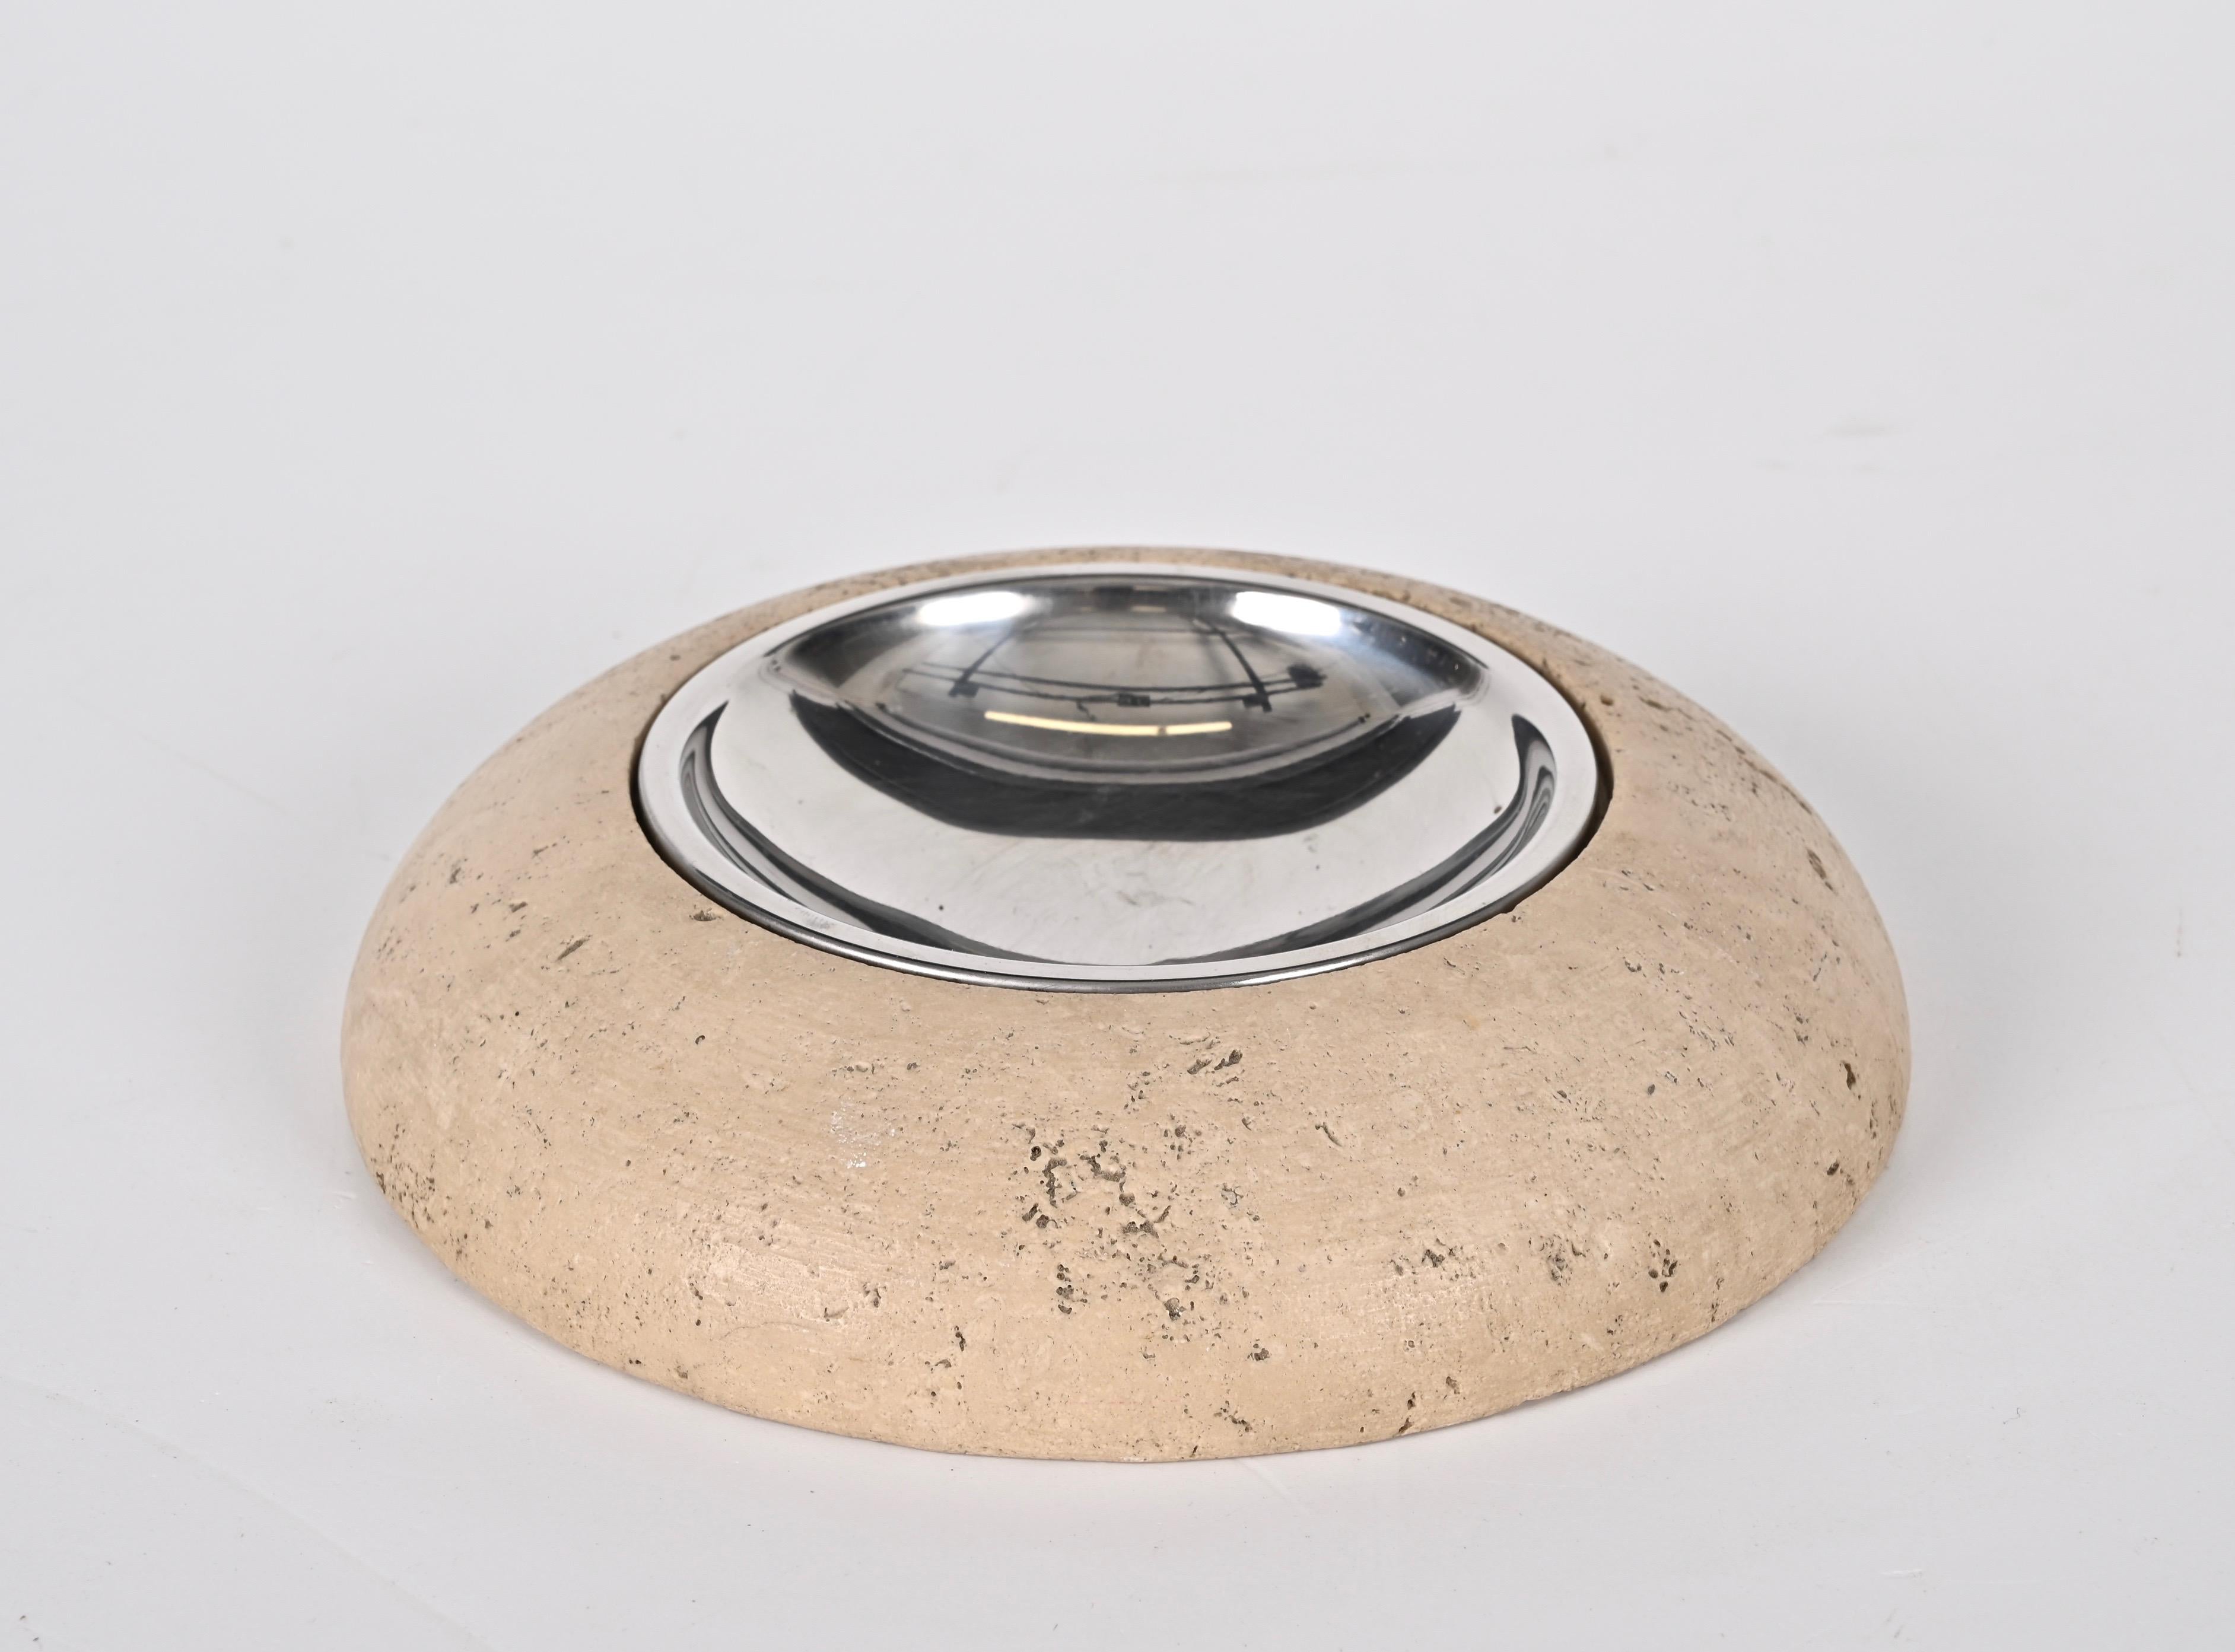 Midcentury Round Ashtray White Travertine Marble and Steel, Mannelli Italy 1970s For Sale 5